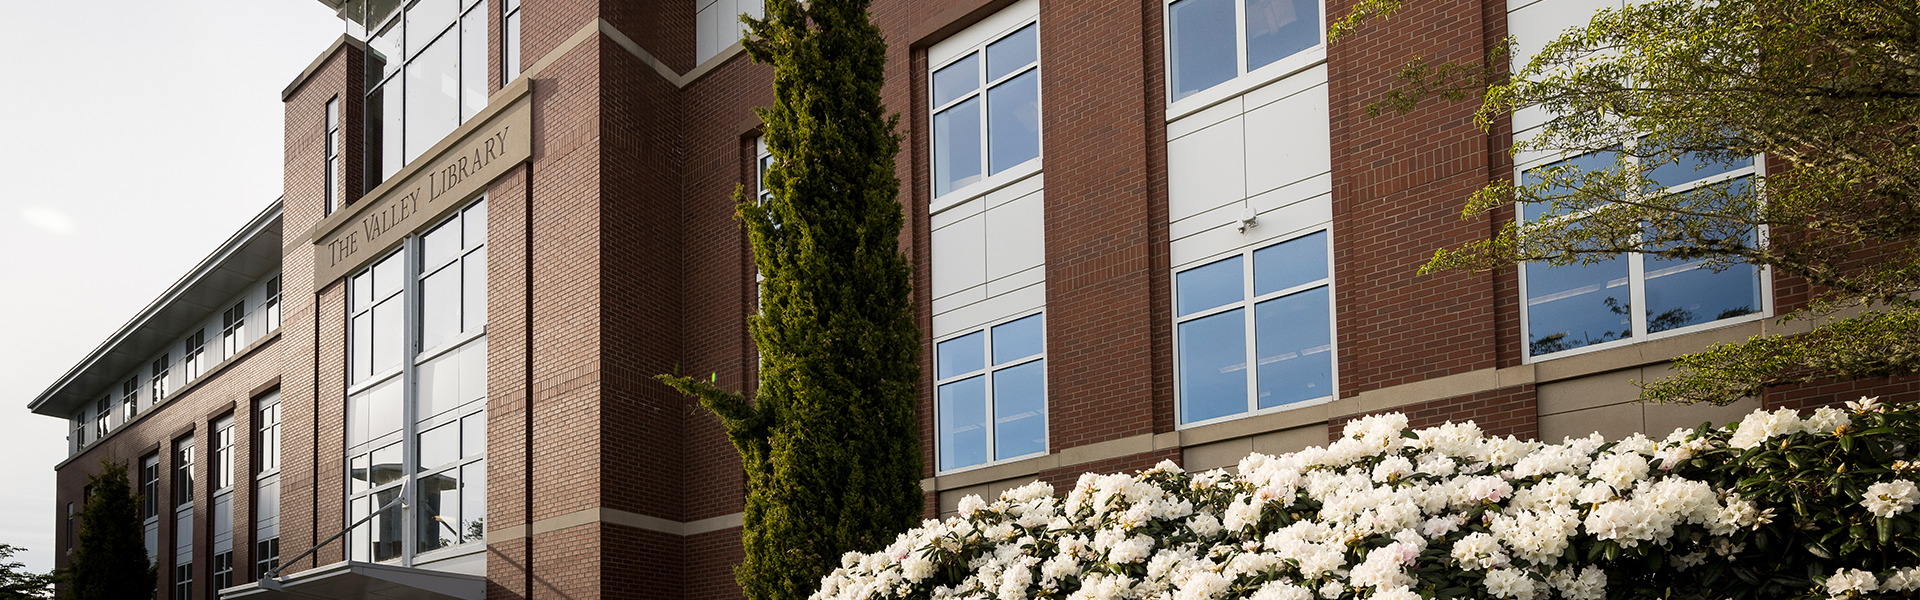 OSU Valley Library Building with bushes of white flowers